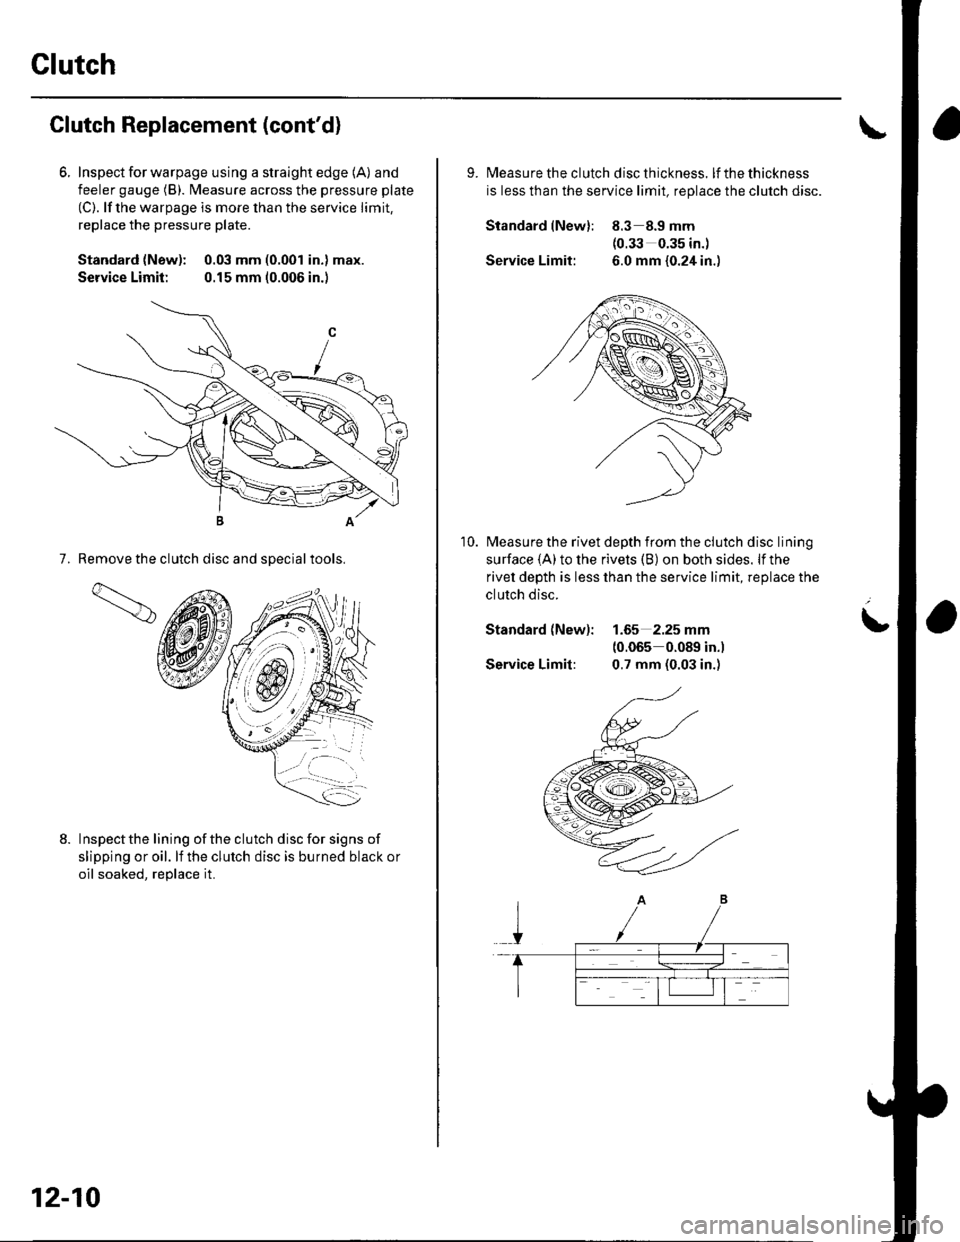 HONDA CIVIC 2003 7.G Owners Guide Clutch
Clutch Replacement (contd)
6. Inspecl for warpage using a straight edge (A) and
feeler gauge (B). l\4easure across the pressure plate
(C). lf the warpage is more than the service limit,
replac